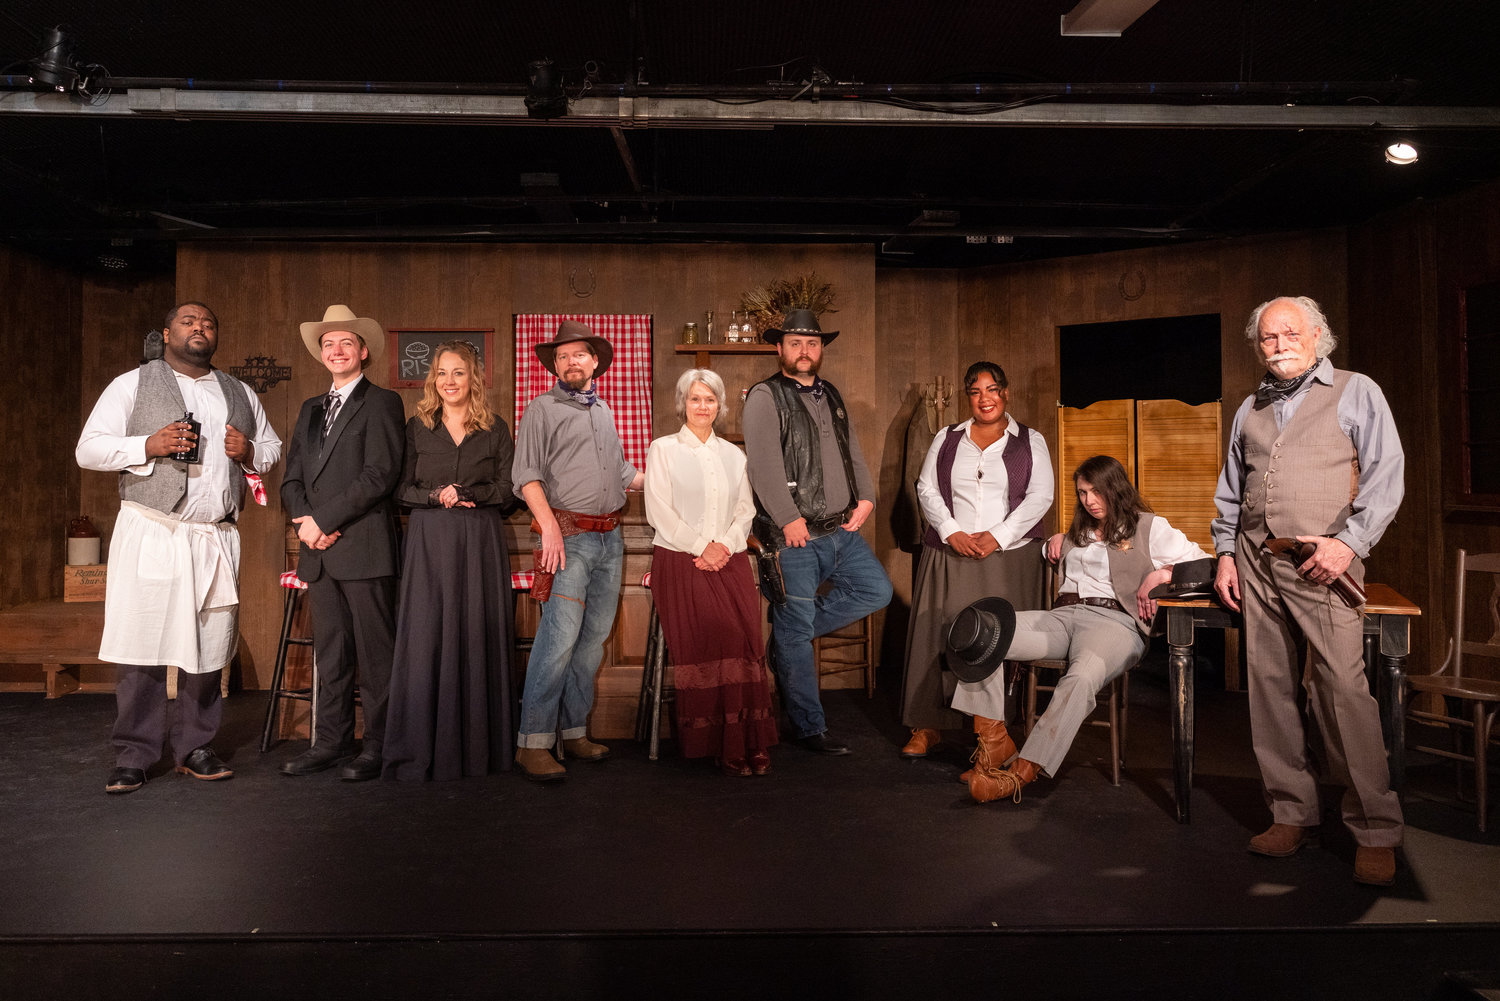 'The Man Who Shot Liberty Valance,' the season opener for Gilbert Theater, brings the wild American frontier to the stage through Oct. 2.